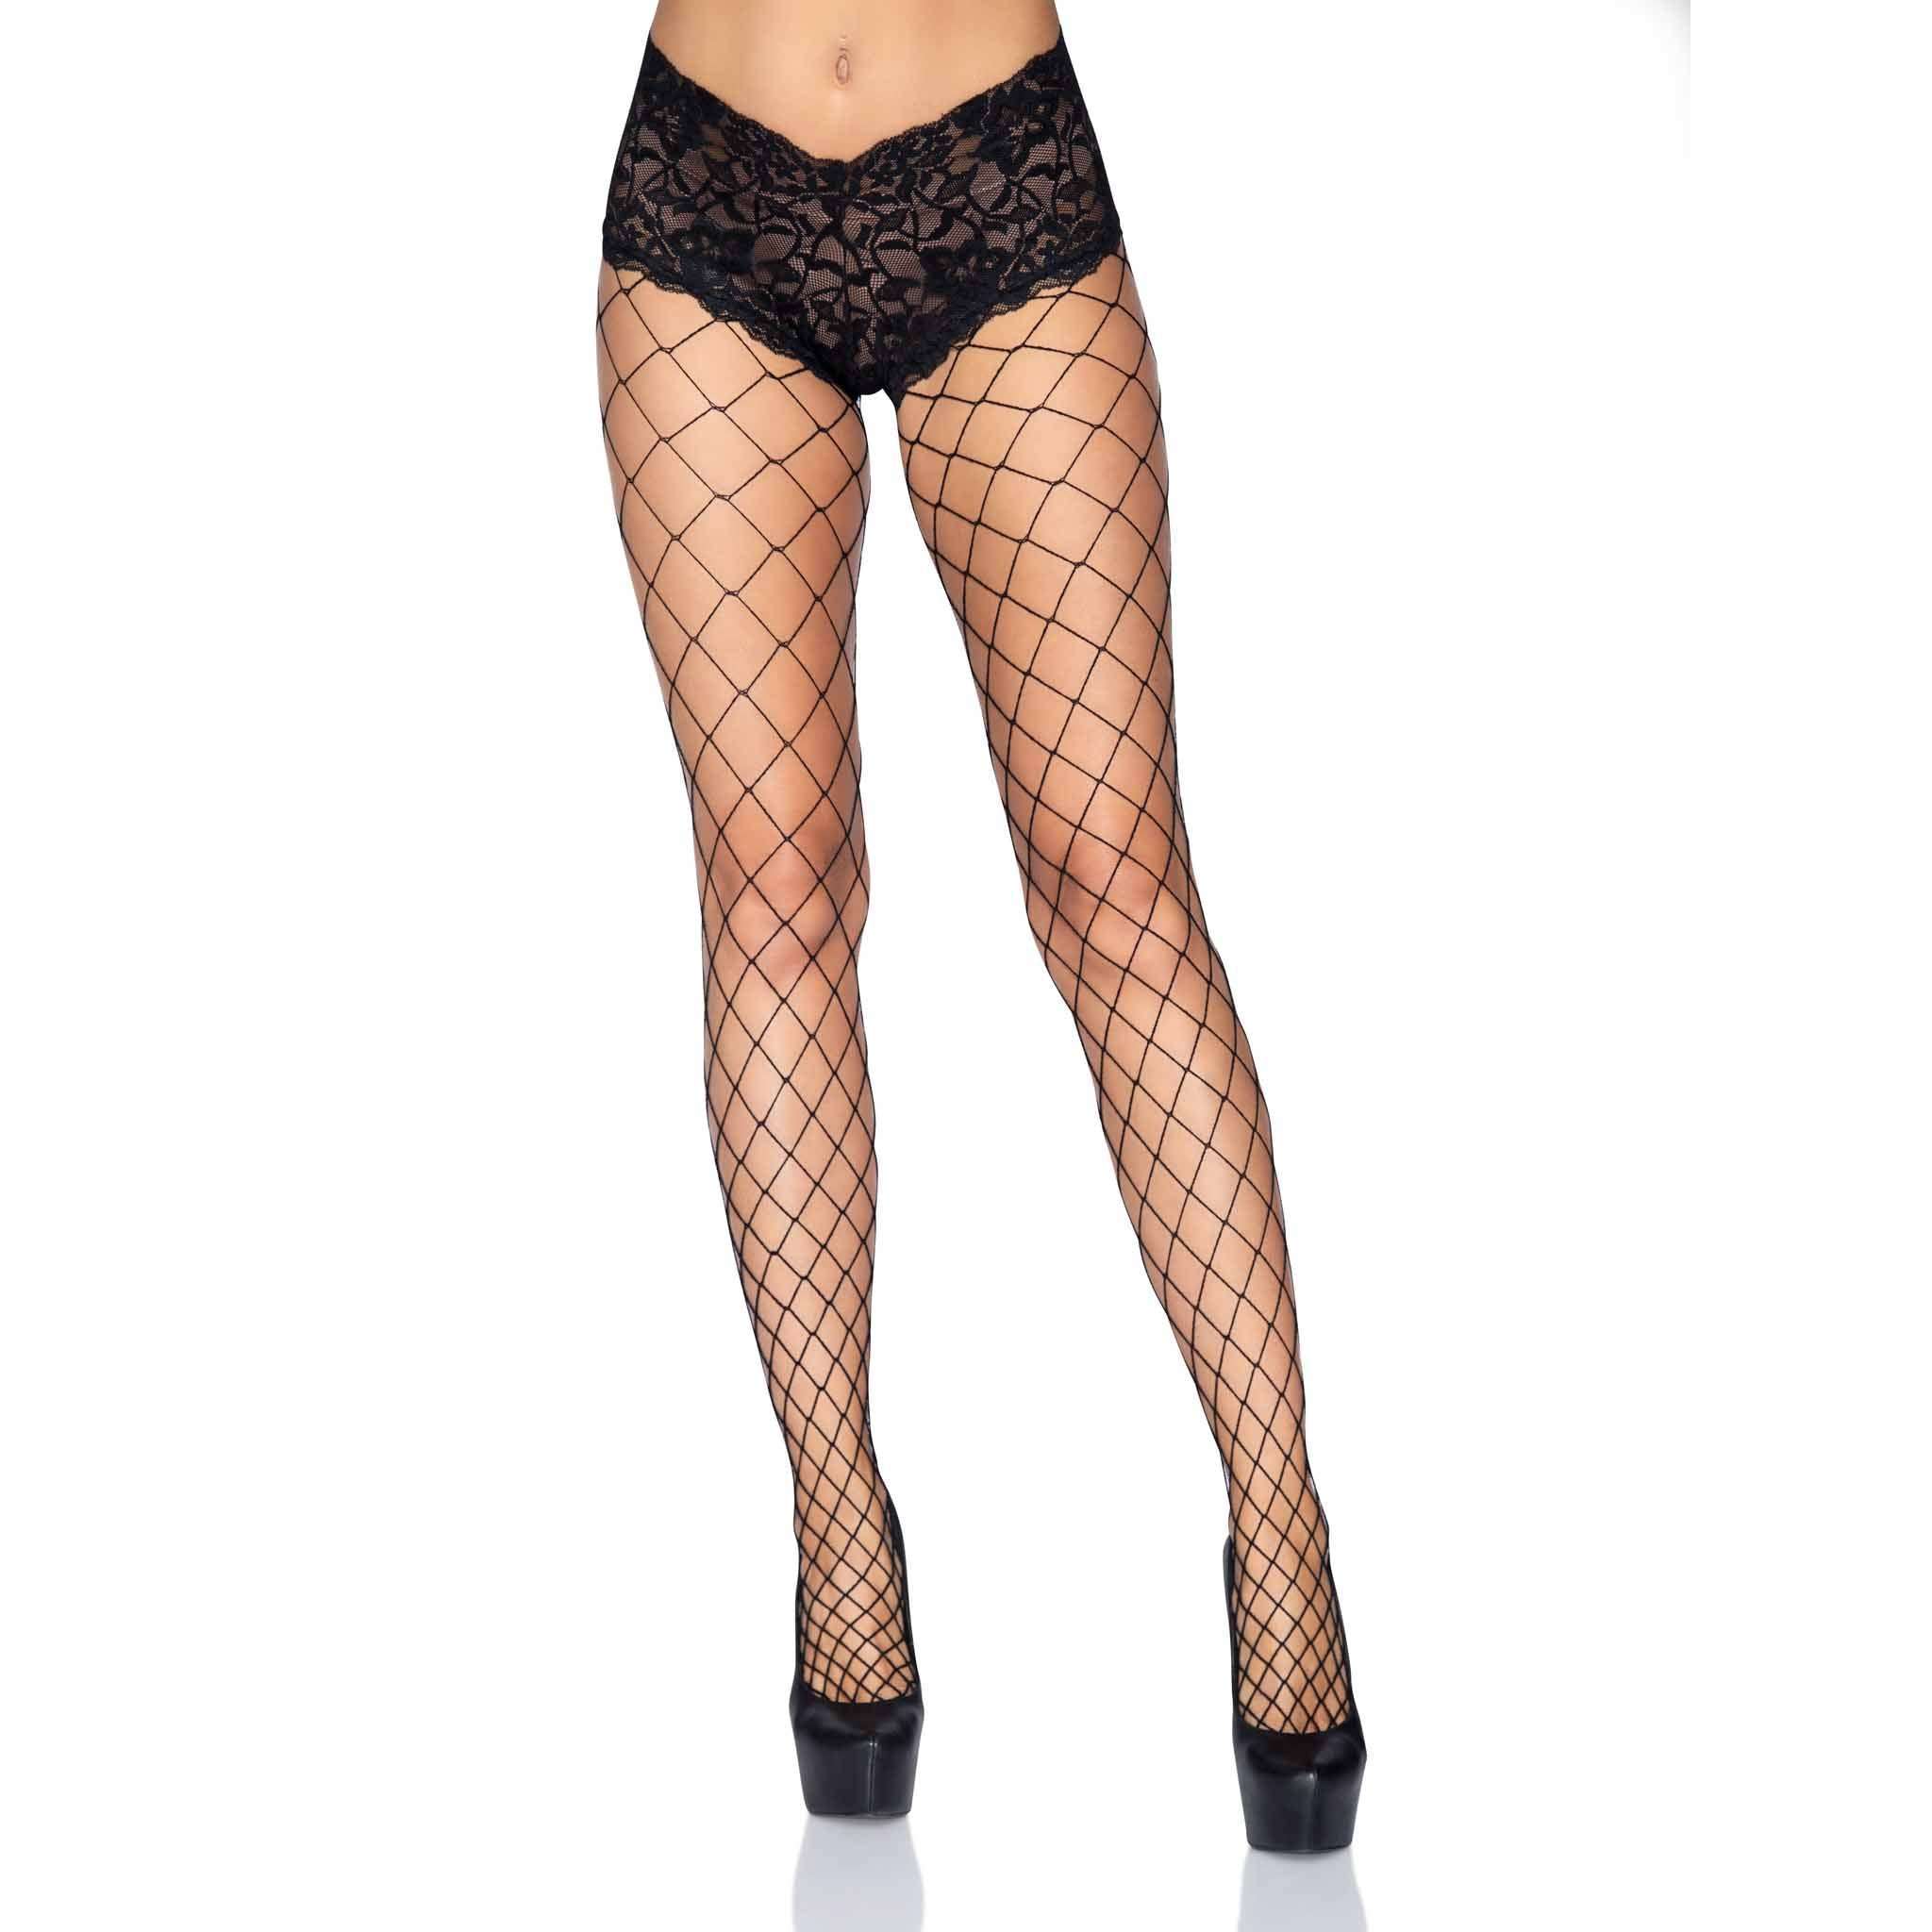 Black Fence Fishnet with Boy Short Lace Top